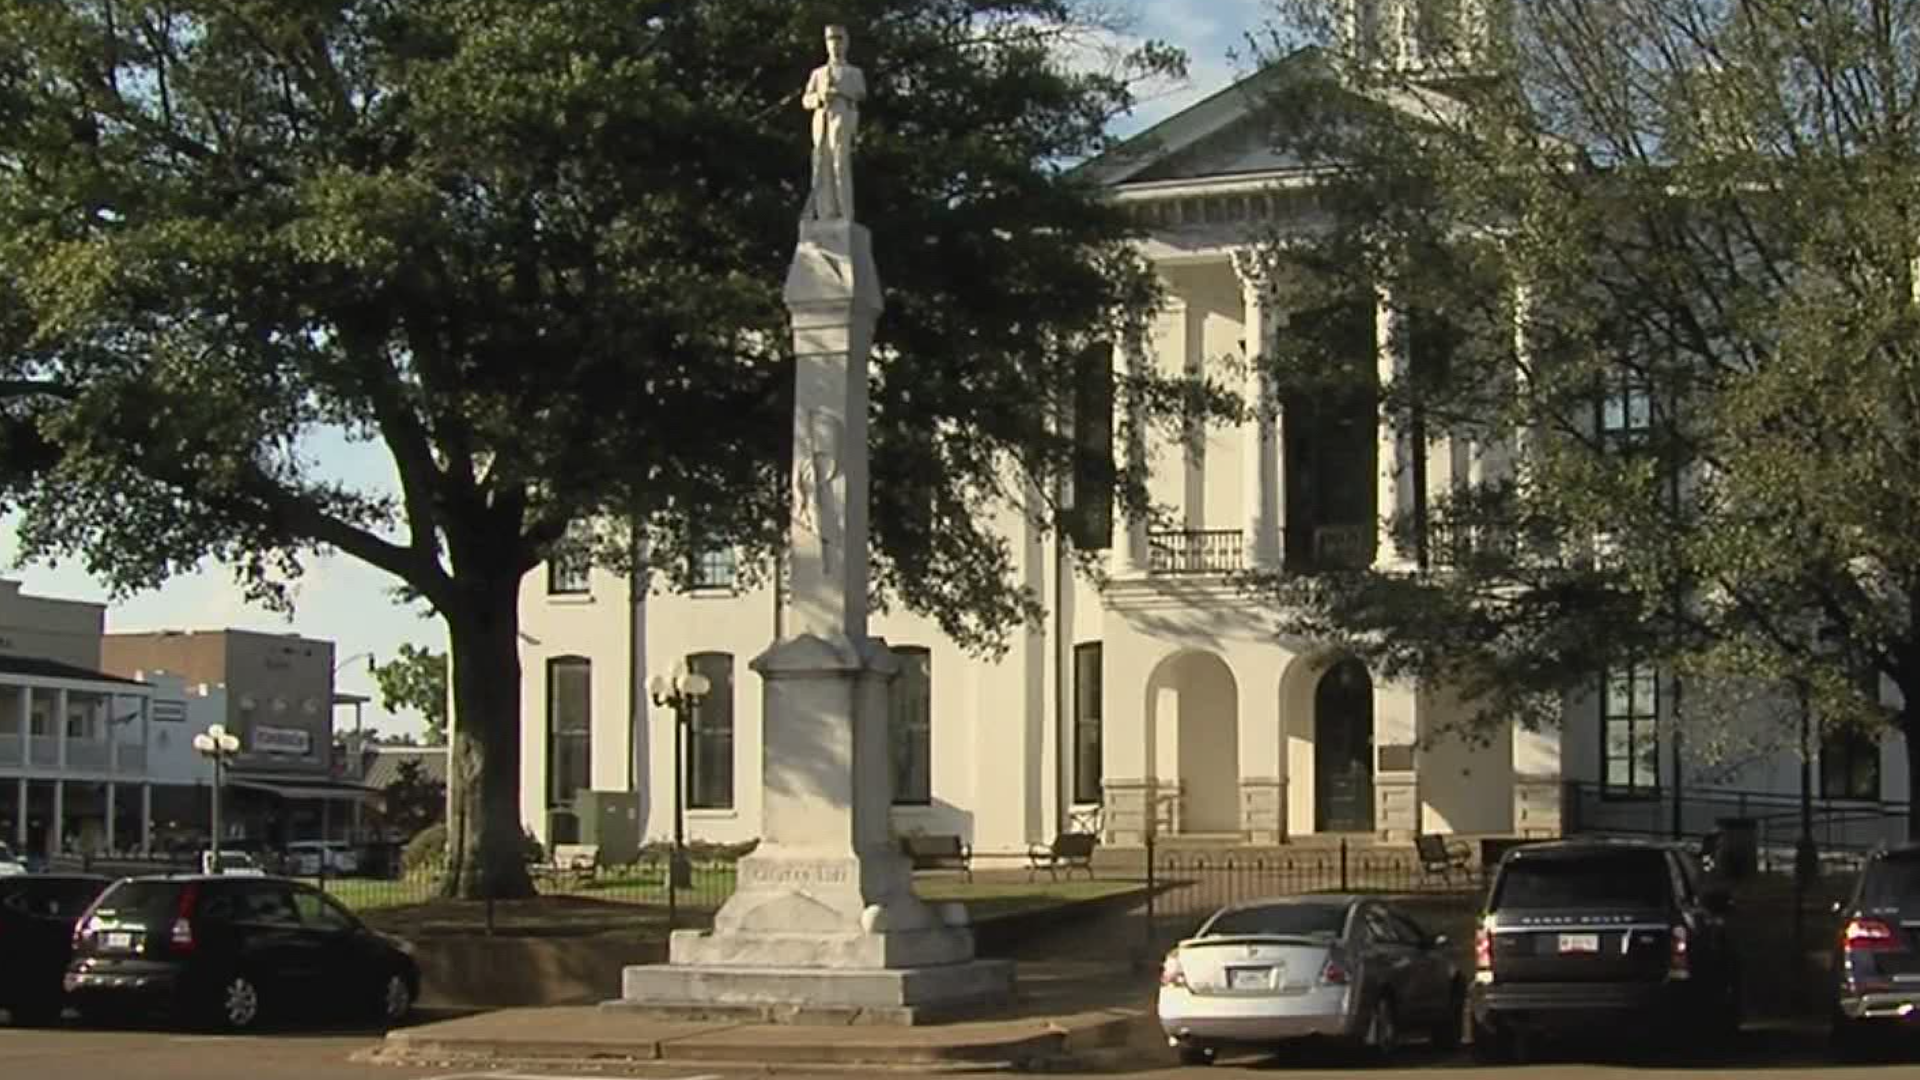 Officials in the county unanimously voted to keep a Confederate monument where it stands because moving the statue wouldn't fix racial tensions.